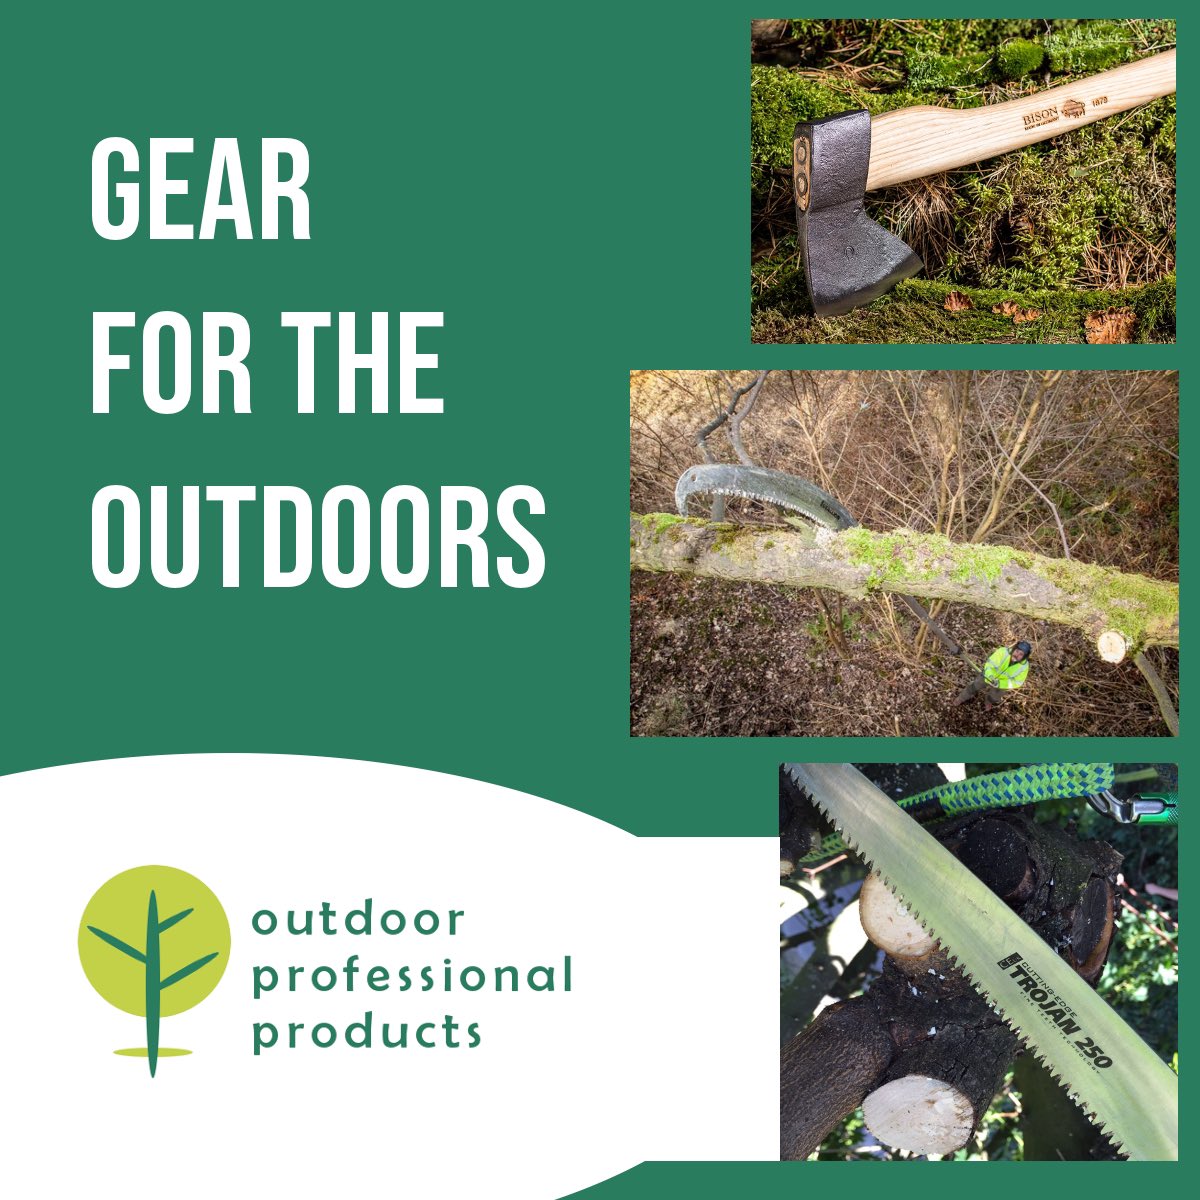 Sourcing cutting-edge products for outdoor professionals since 2009.

Shop our range at outdoorprofessionalproducts.com with fast local and UK wide delivery.

#lovelocalshoplocal